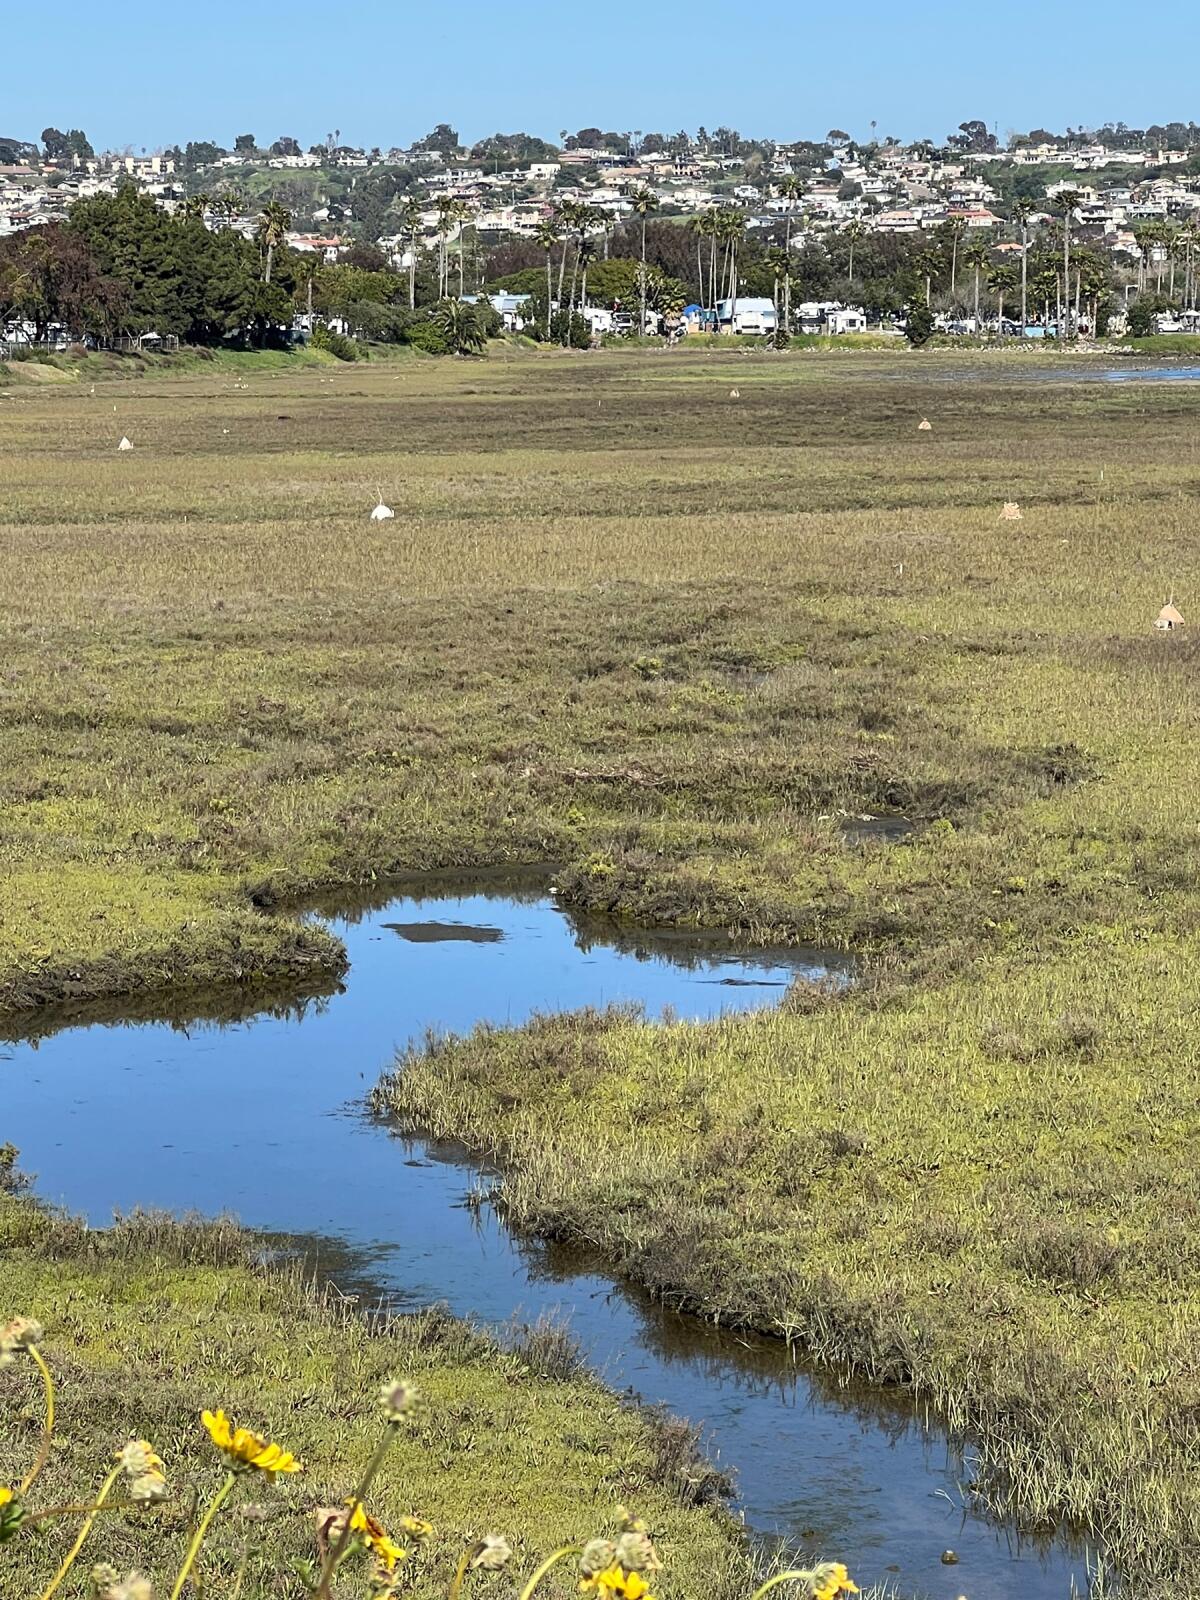 The Kendall Frost Marsh in Mission Bay.